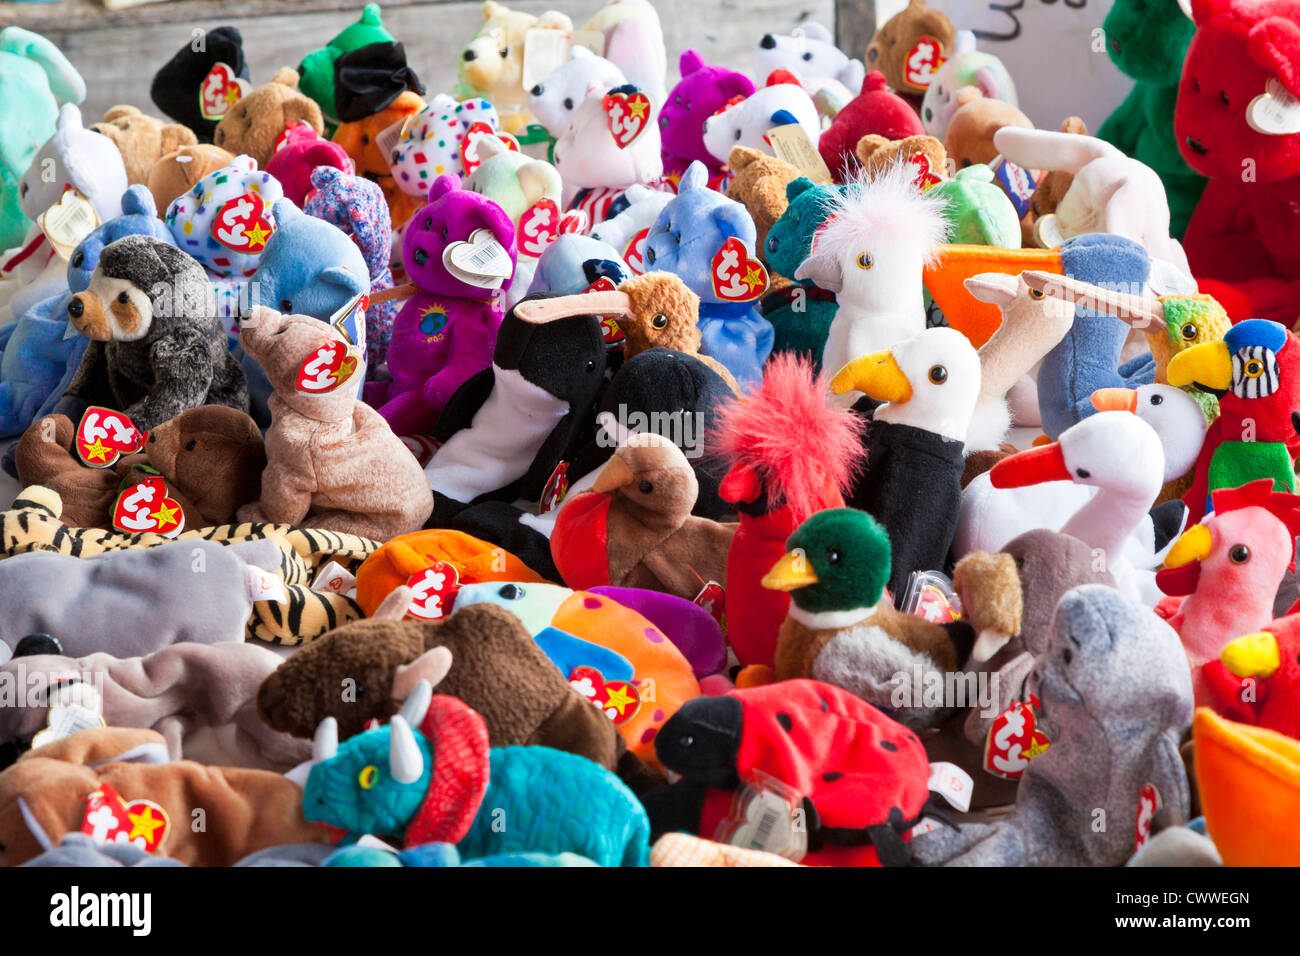 Pile of Beanie Baby soft stuffed toys Stock Photo